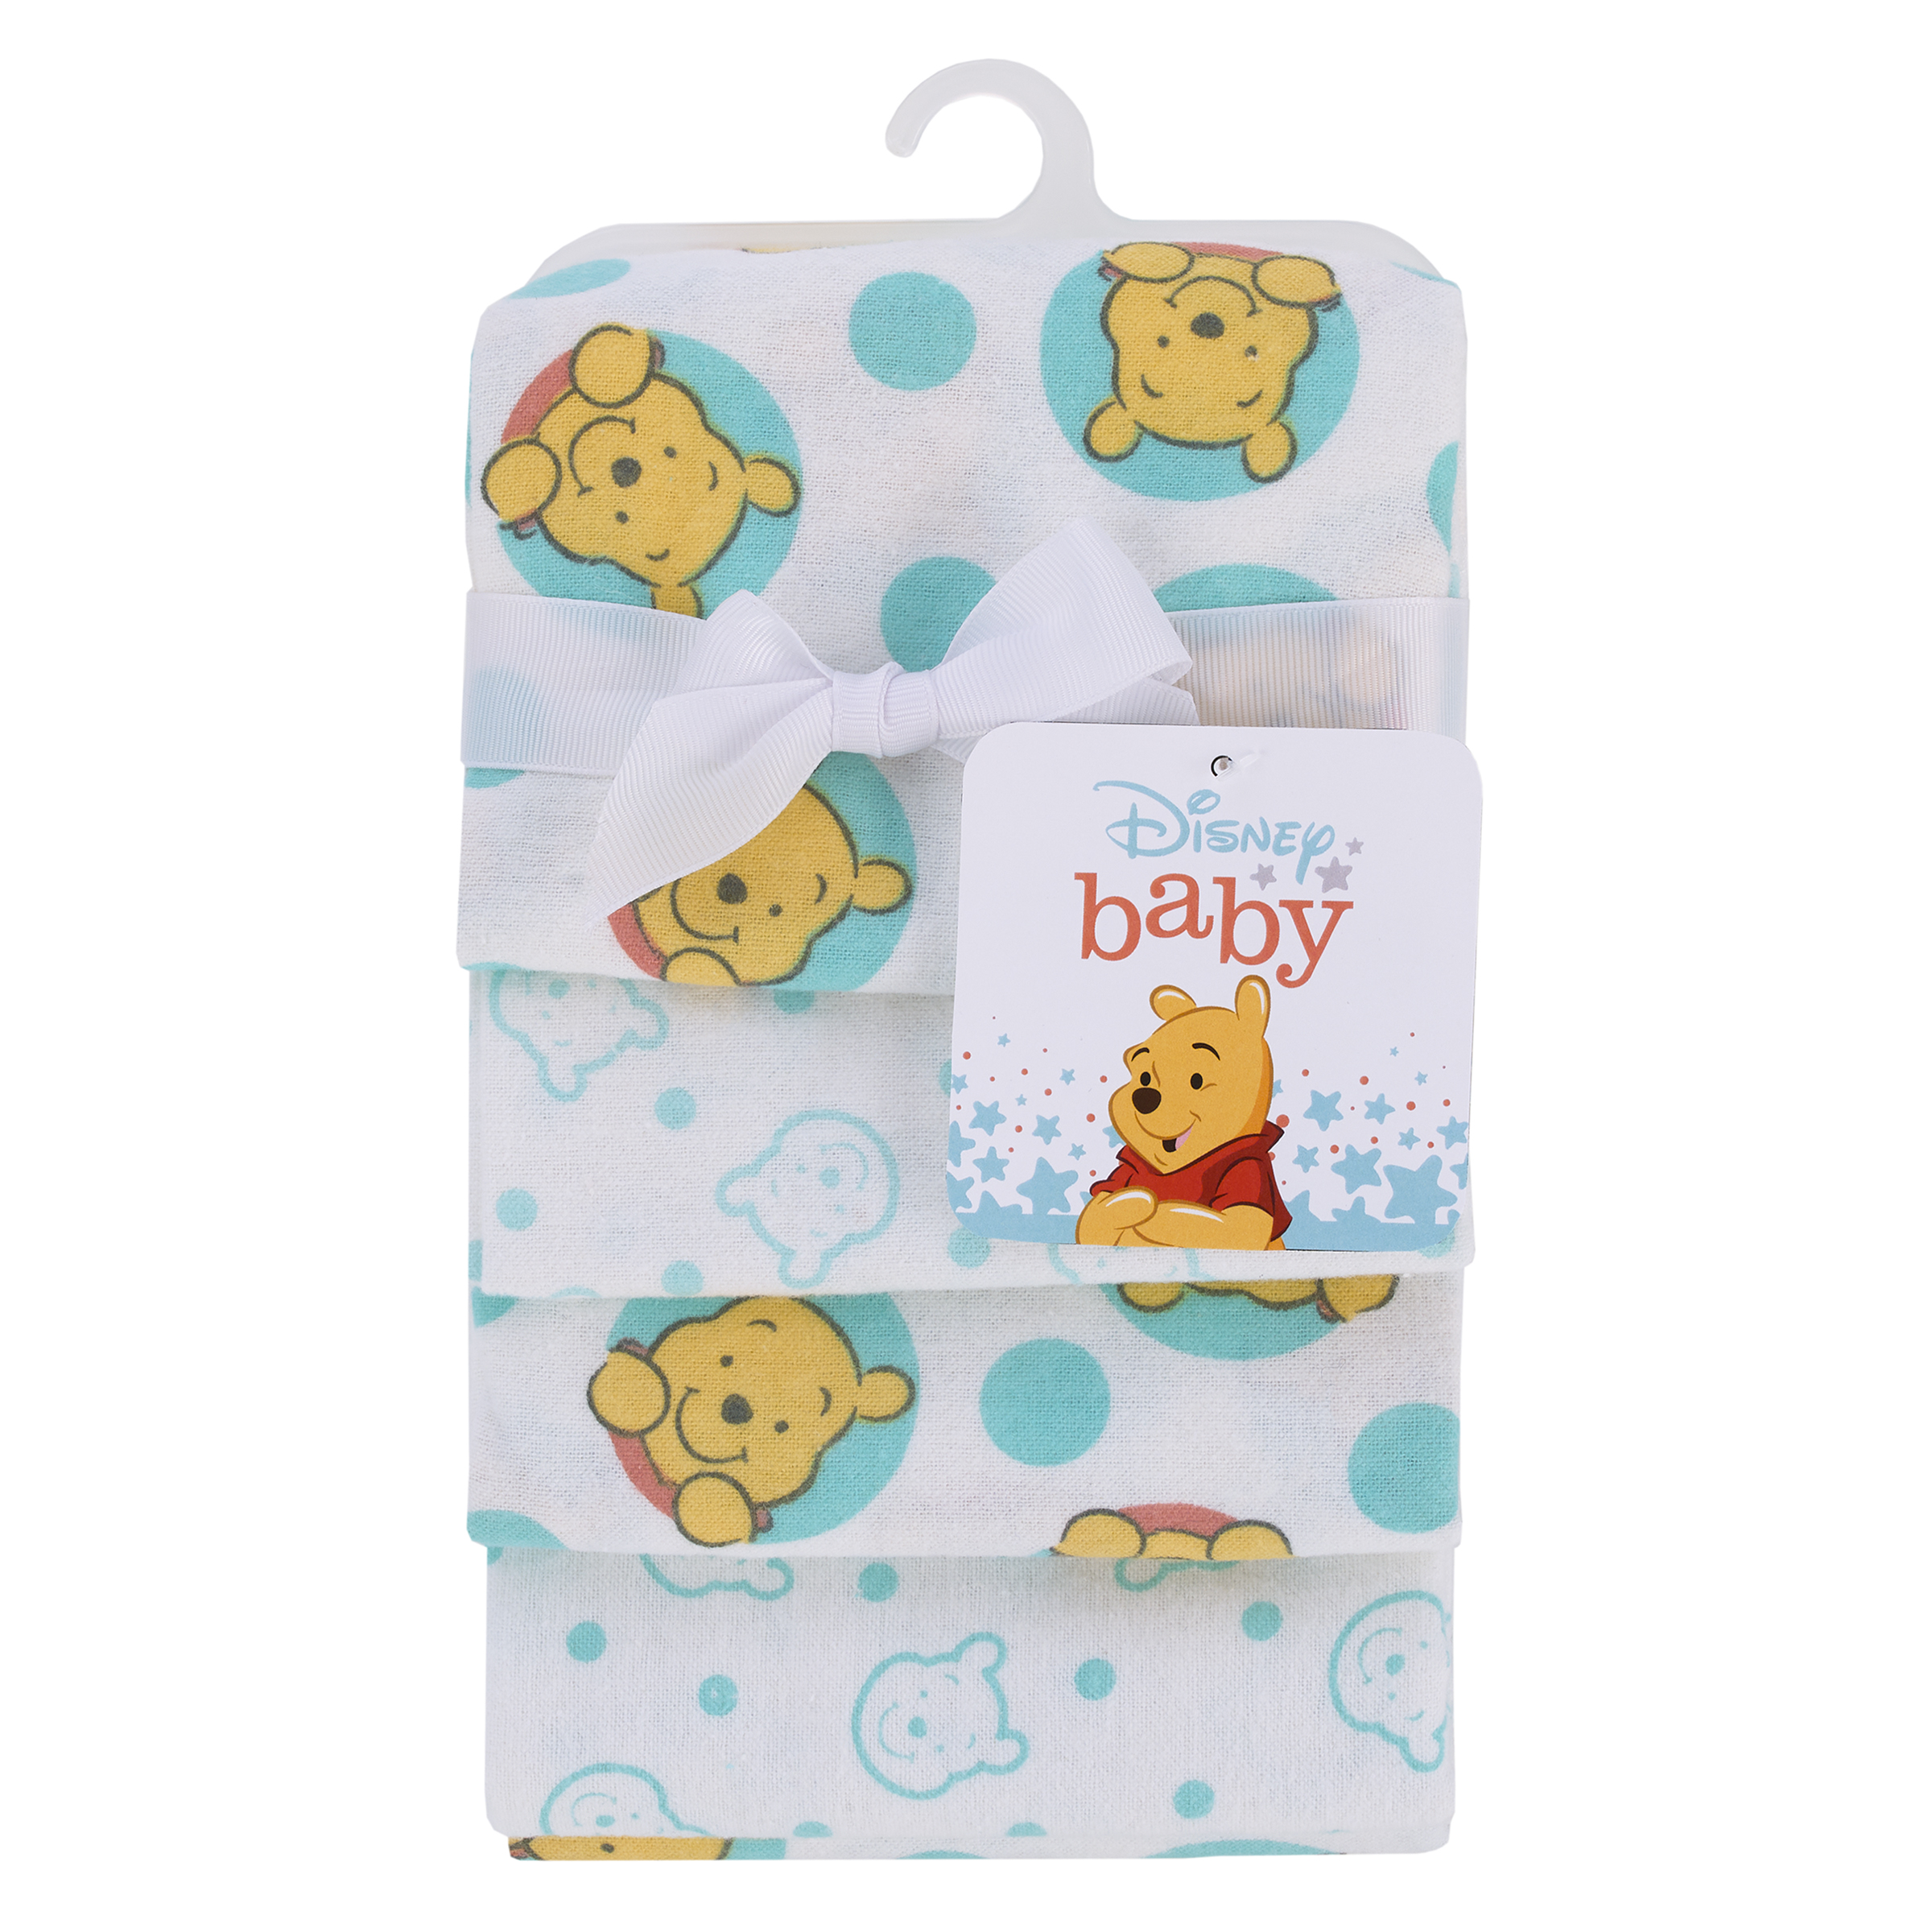 Disney Winnie the Pooh so Loved 4-PK Cotton Receiving Blankets, Yellow, Aqua, Boy and Girl Infant - image 1 of 8